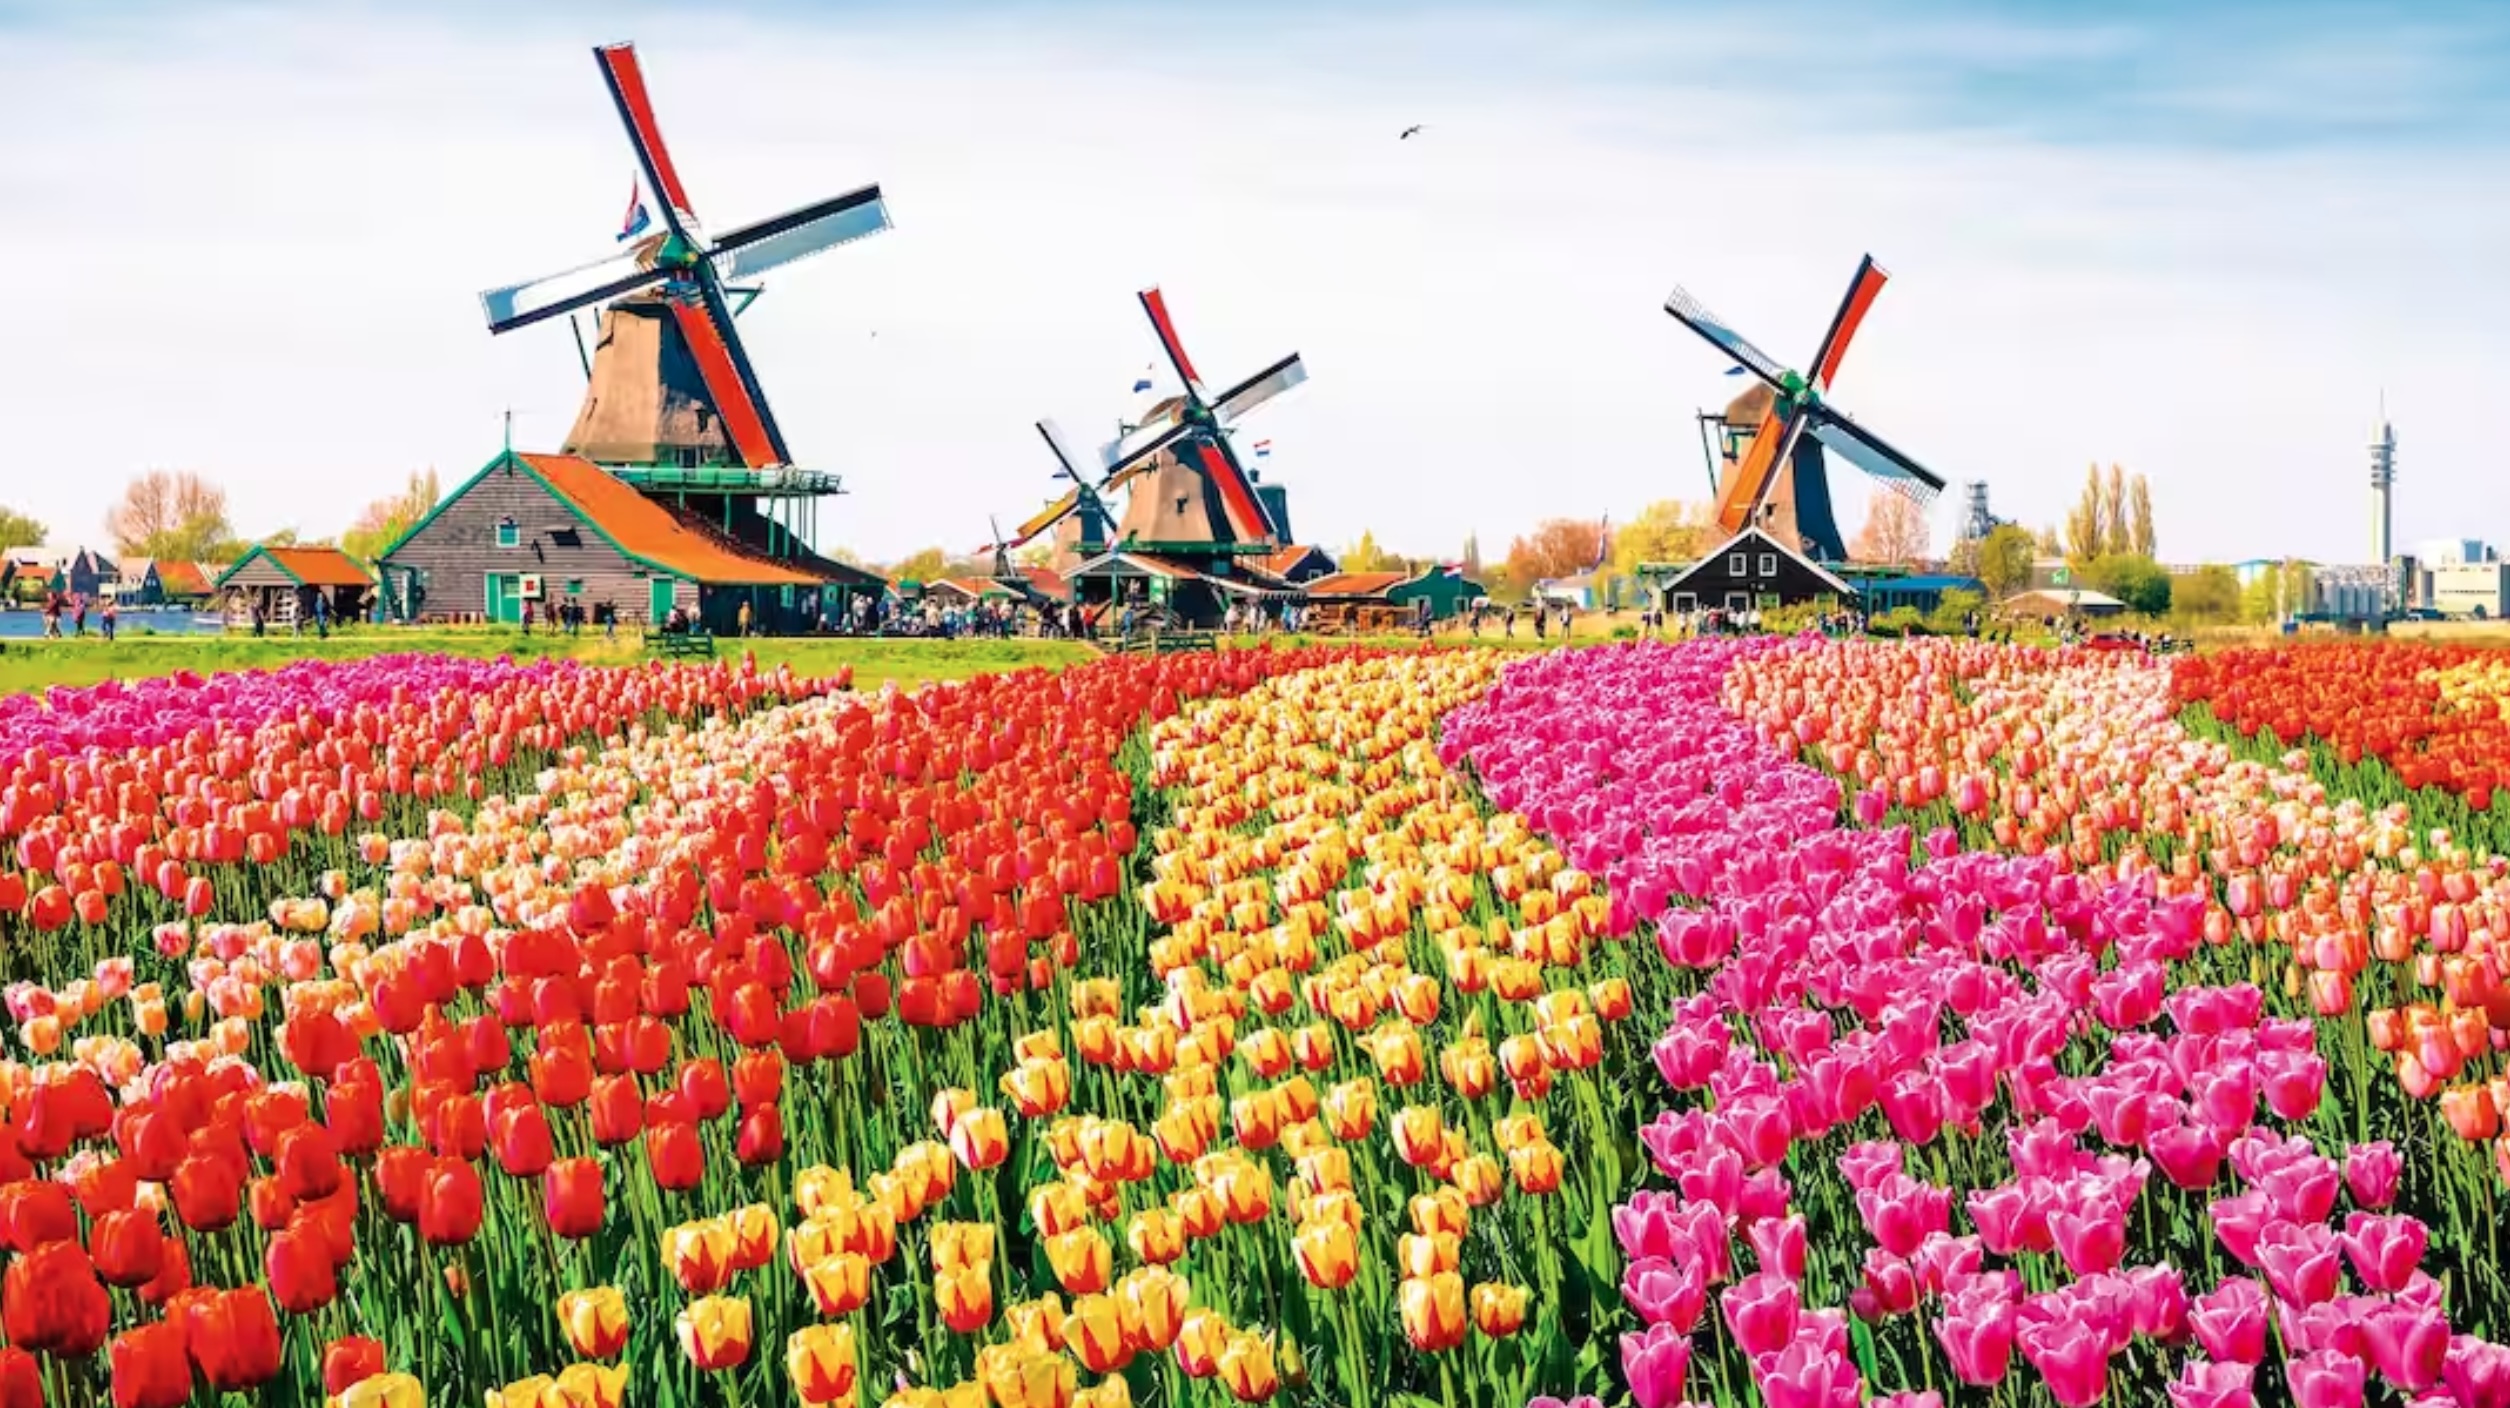 Colourful tulips and windmills painting